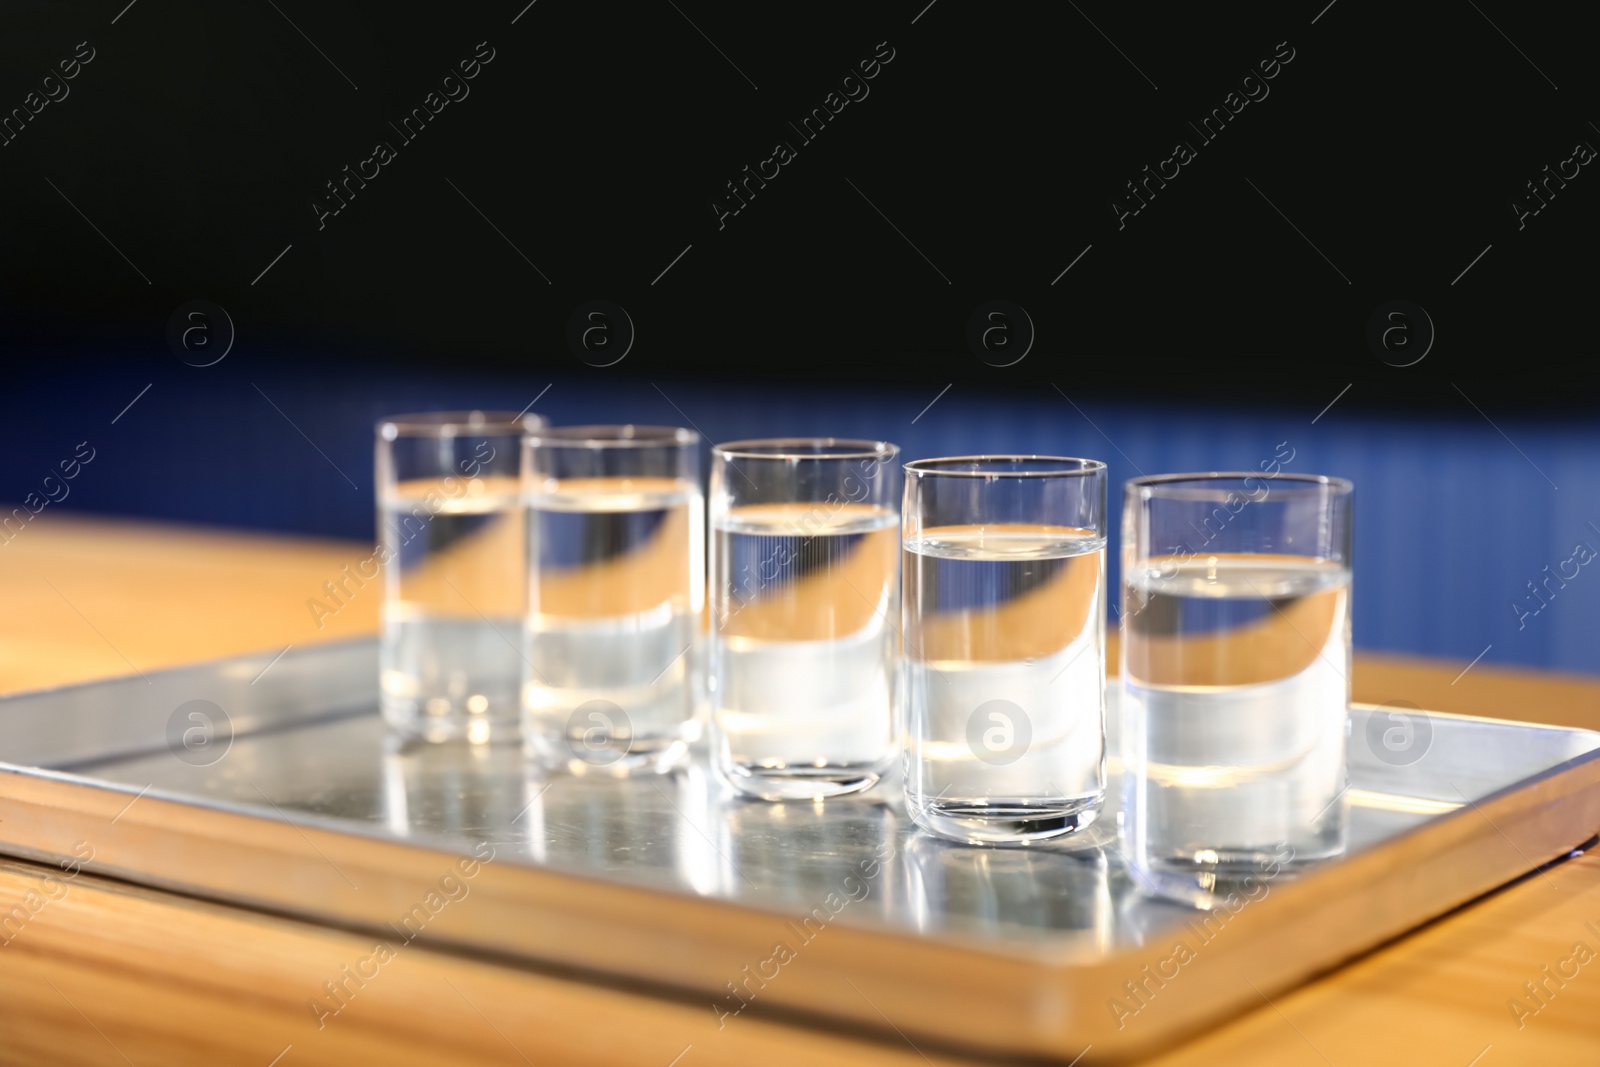 Photo of Shots of vodka on bar counter against dark background